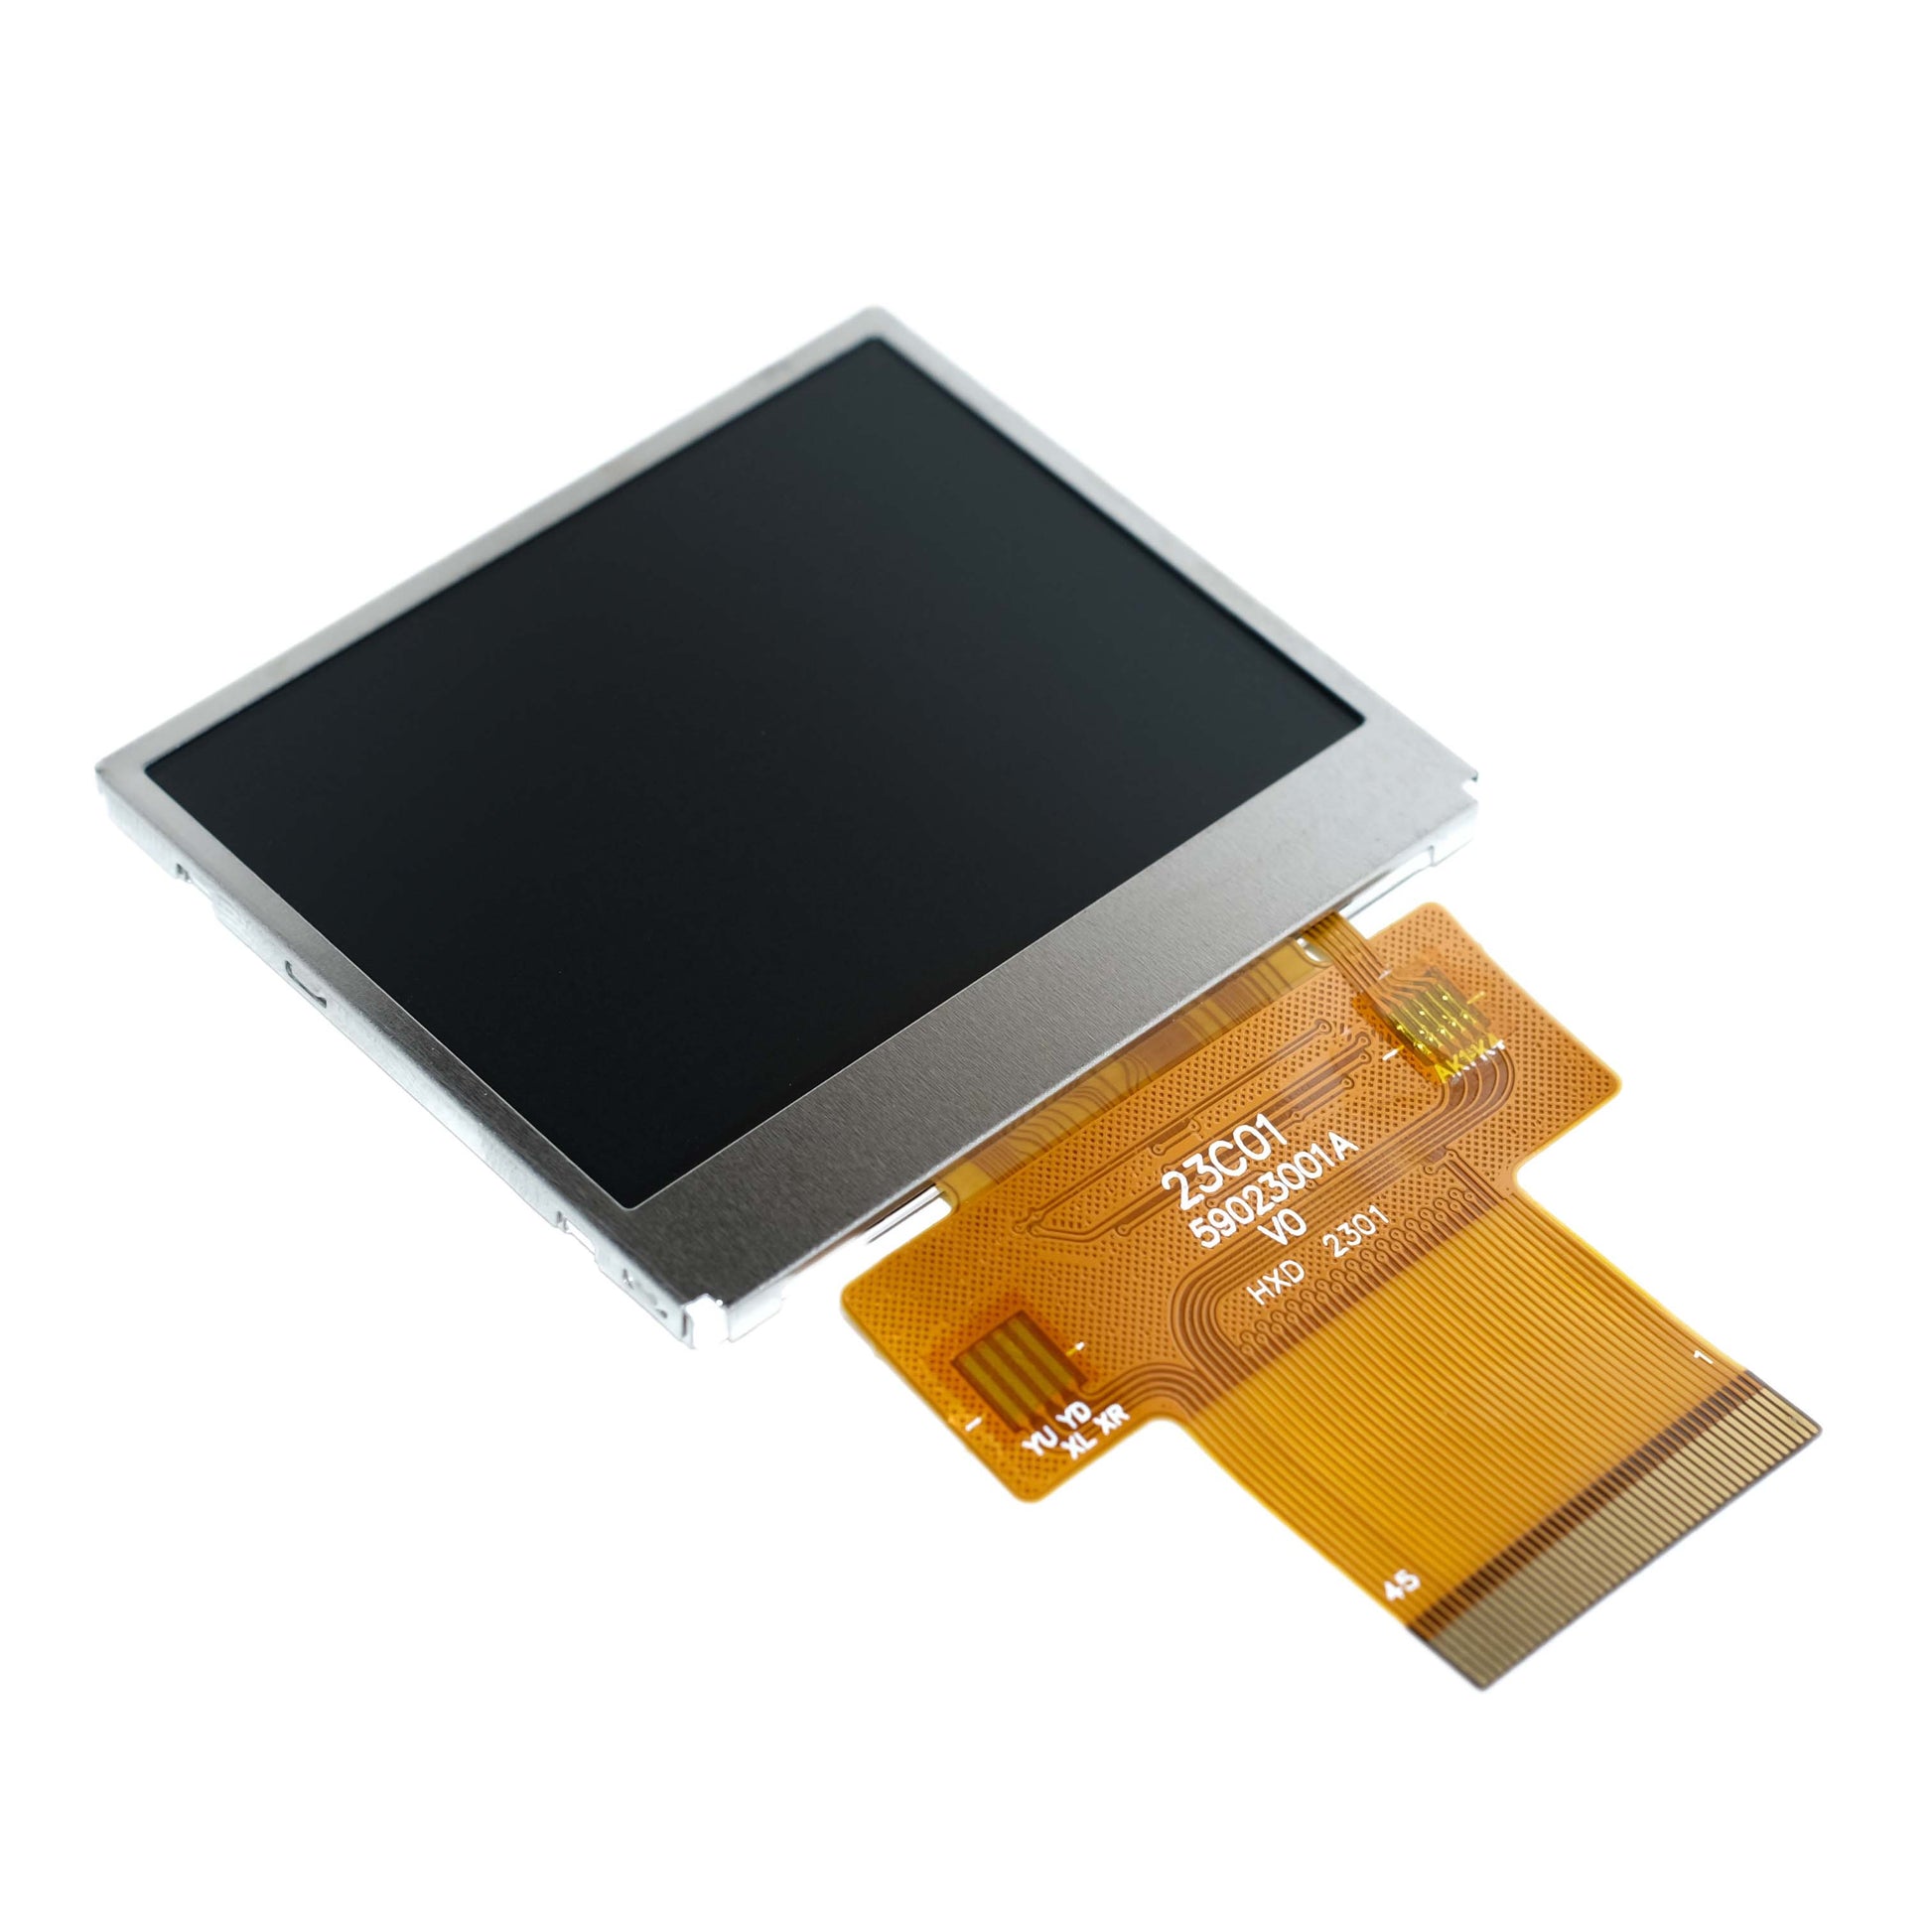 side of a 2.36-inch Transmissive TFT LCD display panel